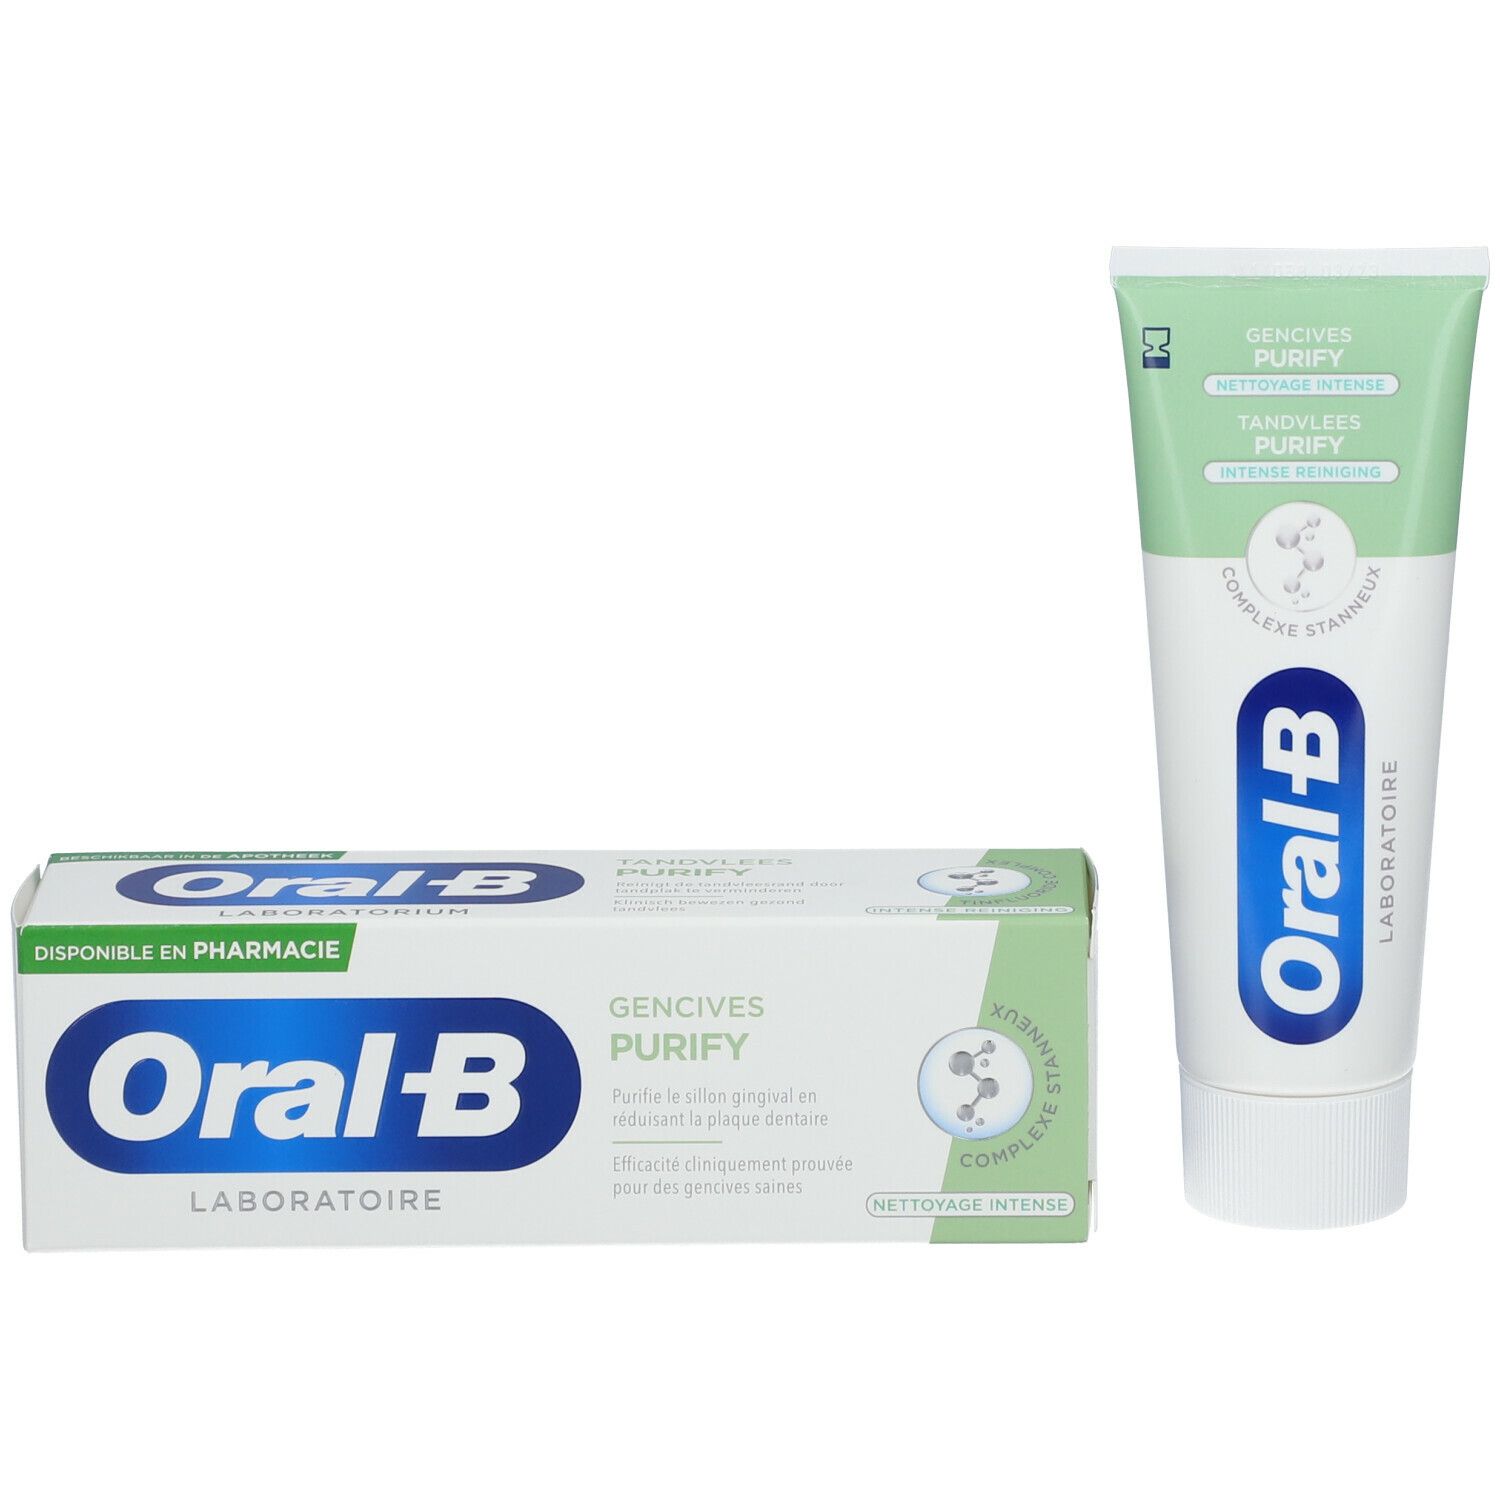 Oral-B GENCIVES PURIFY Dentifrice Nettoyage Intense​